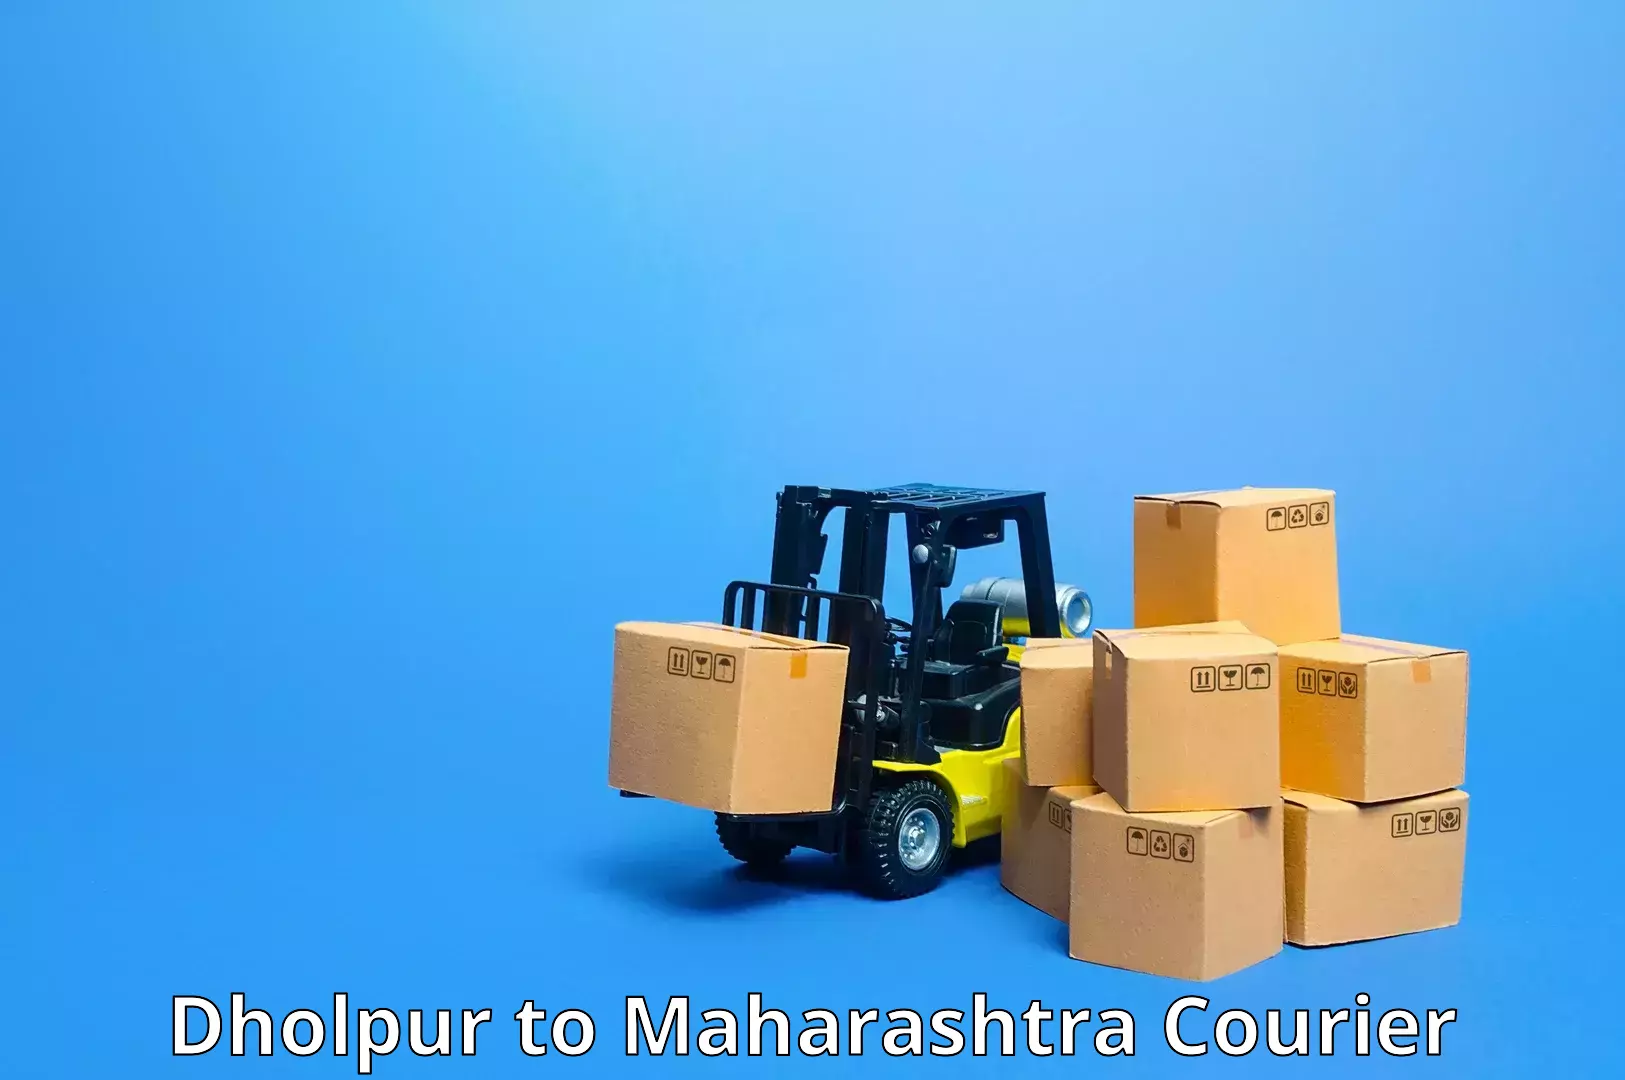 Full-service courier options Dholpur to Koregaon